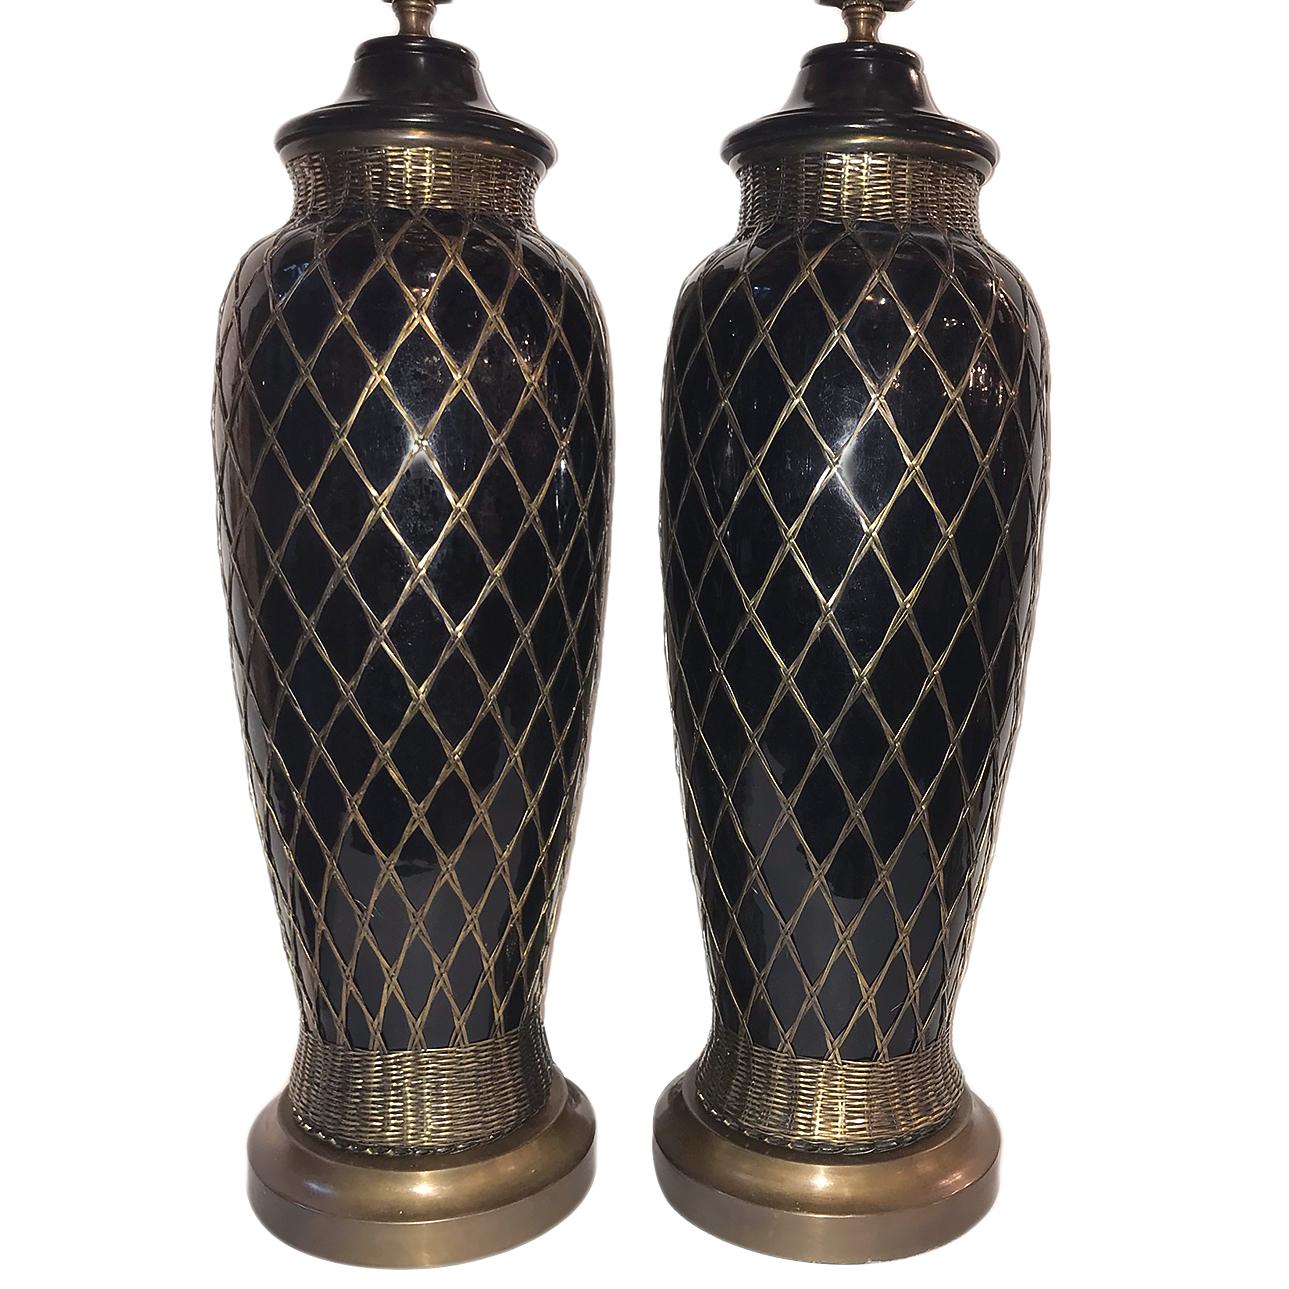 Pair of circa 1940s French black glazed porcelain table lamps with faux bamboo metal weaving on body.

Measurements:
Height of body: 20.5